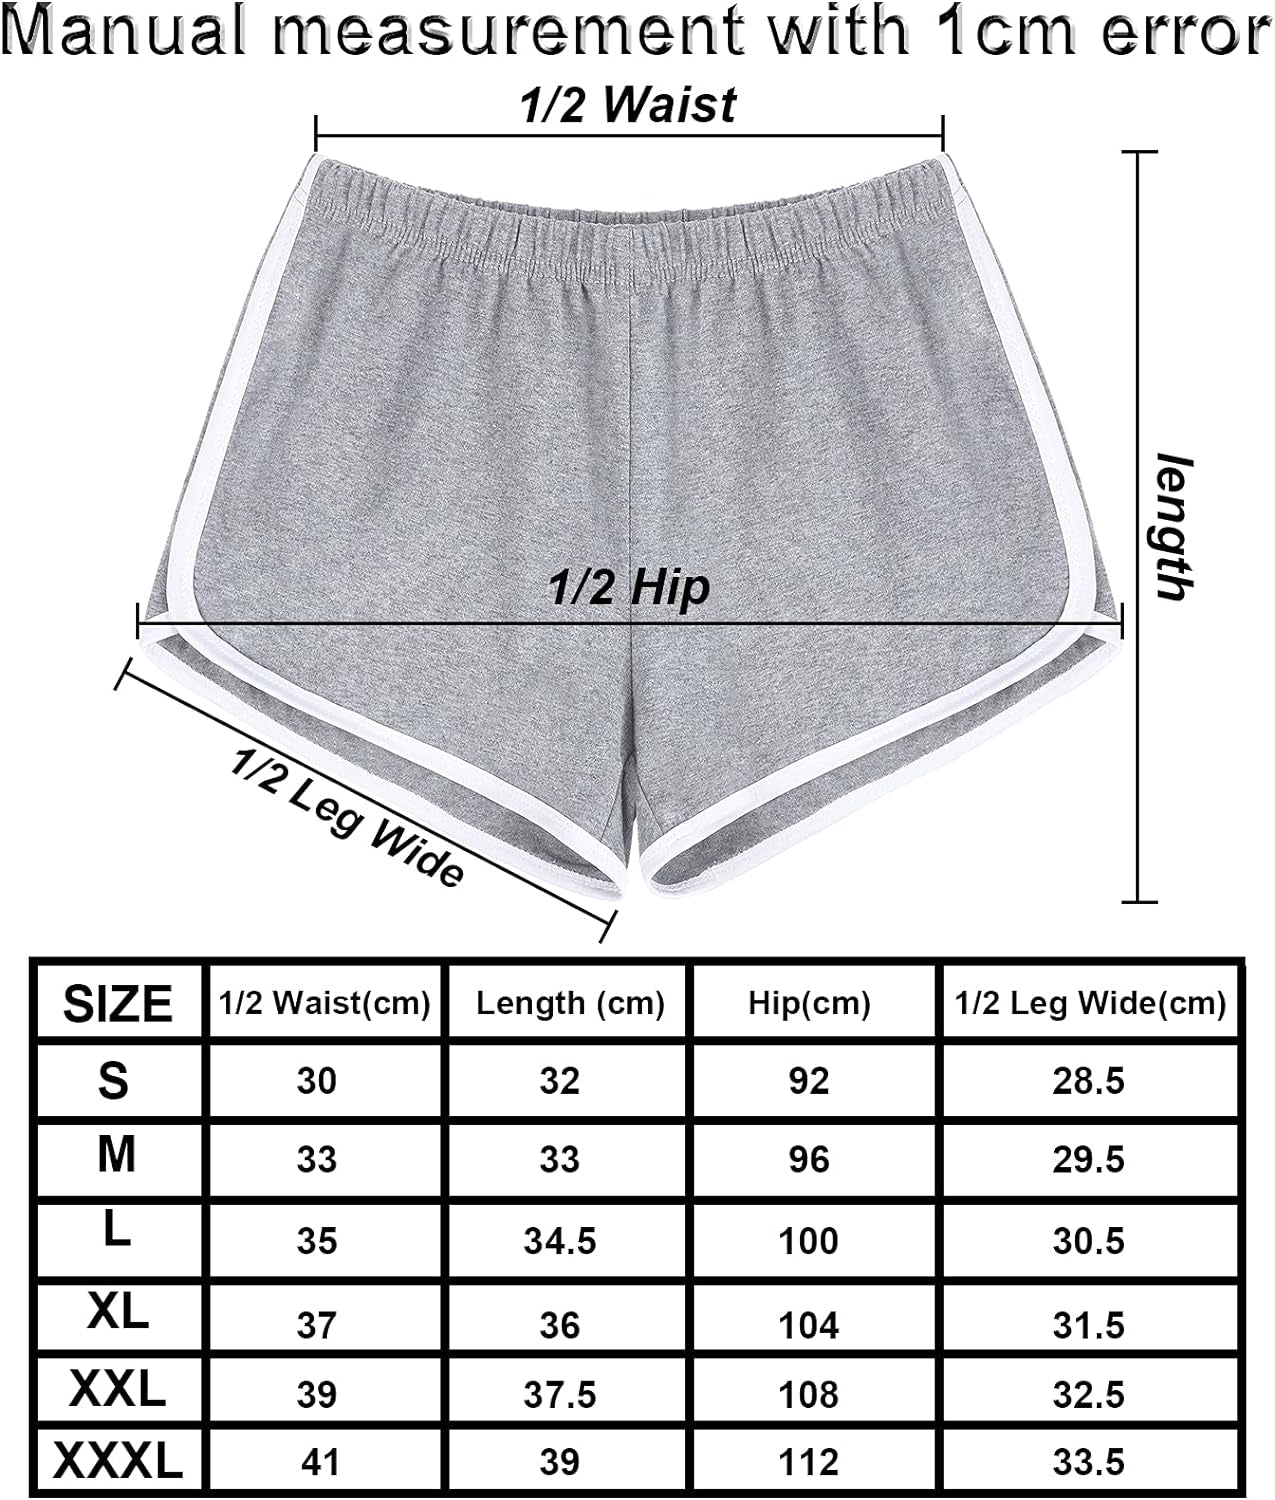 4 Pack Yoga Short Pants Cotton Sports Shorts Gym Dance Lounge Shorts Dolphin Running Athletic Shorts for Women